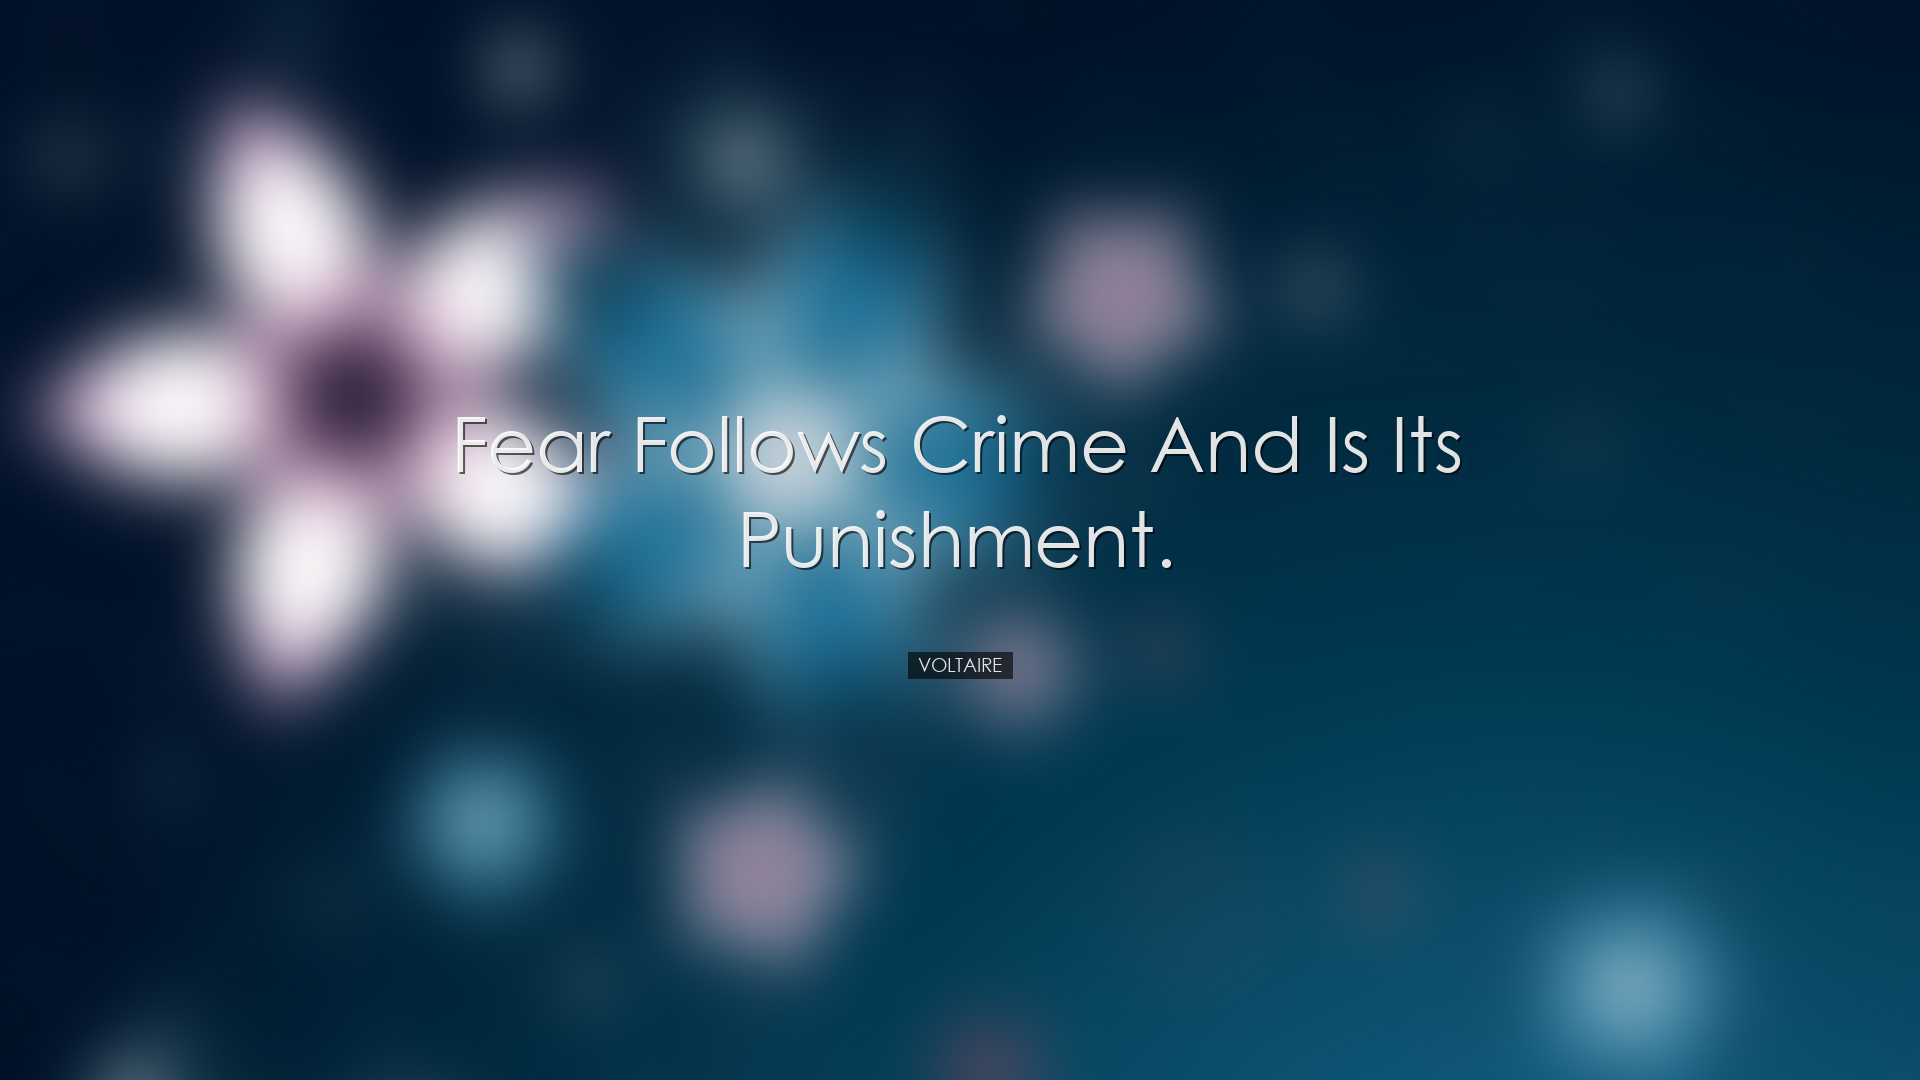 Fear follows crime and is its punishment. - Voltaire